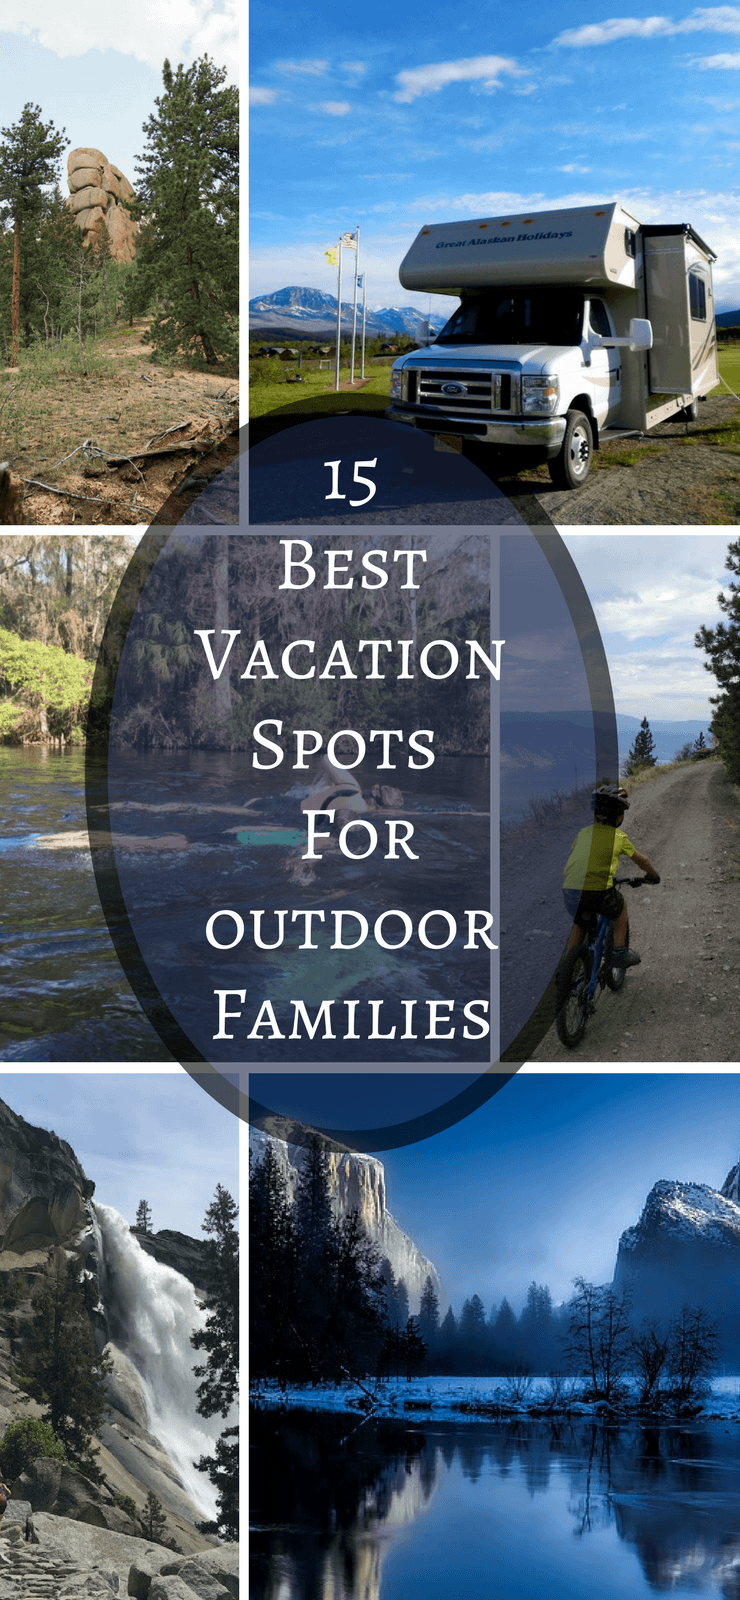 15 Best Vacations Spots for Outdoor Families - See where other outdoor families love to travel to and explore. These travel destinations will inspire you to get out and start exploring with your kids.